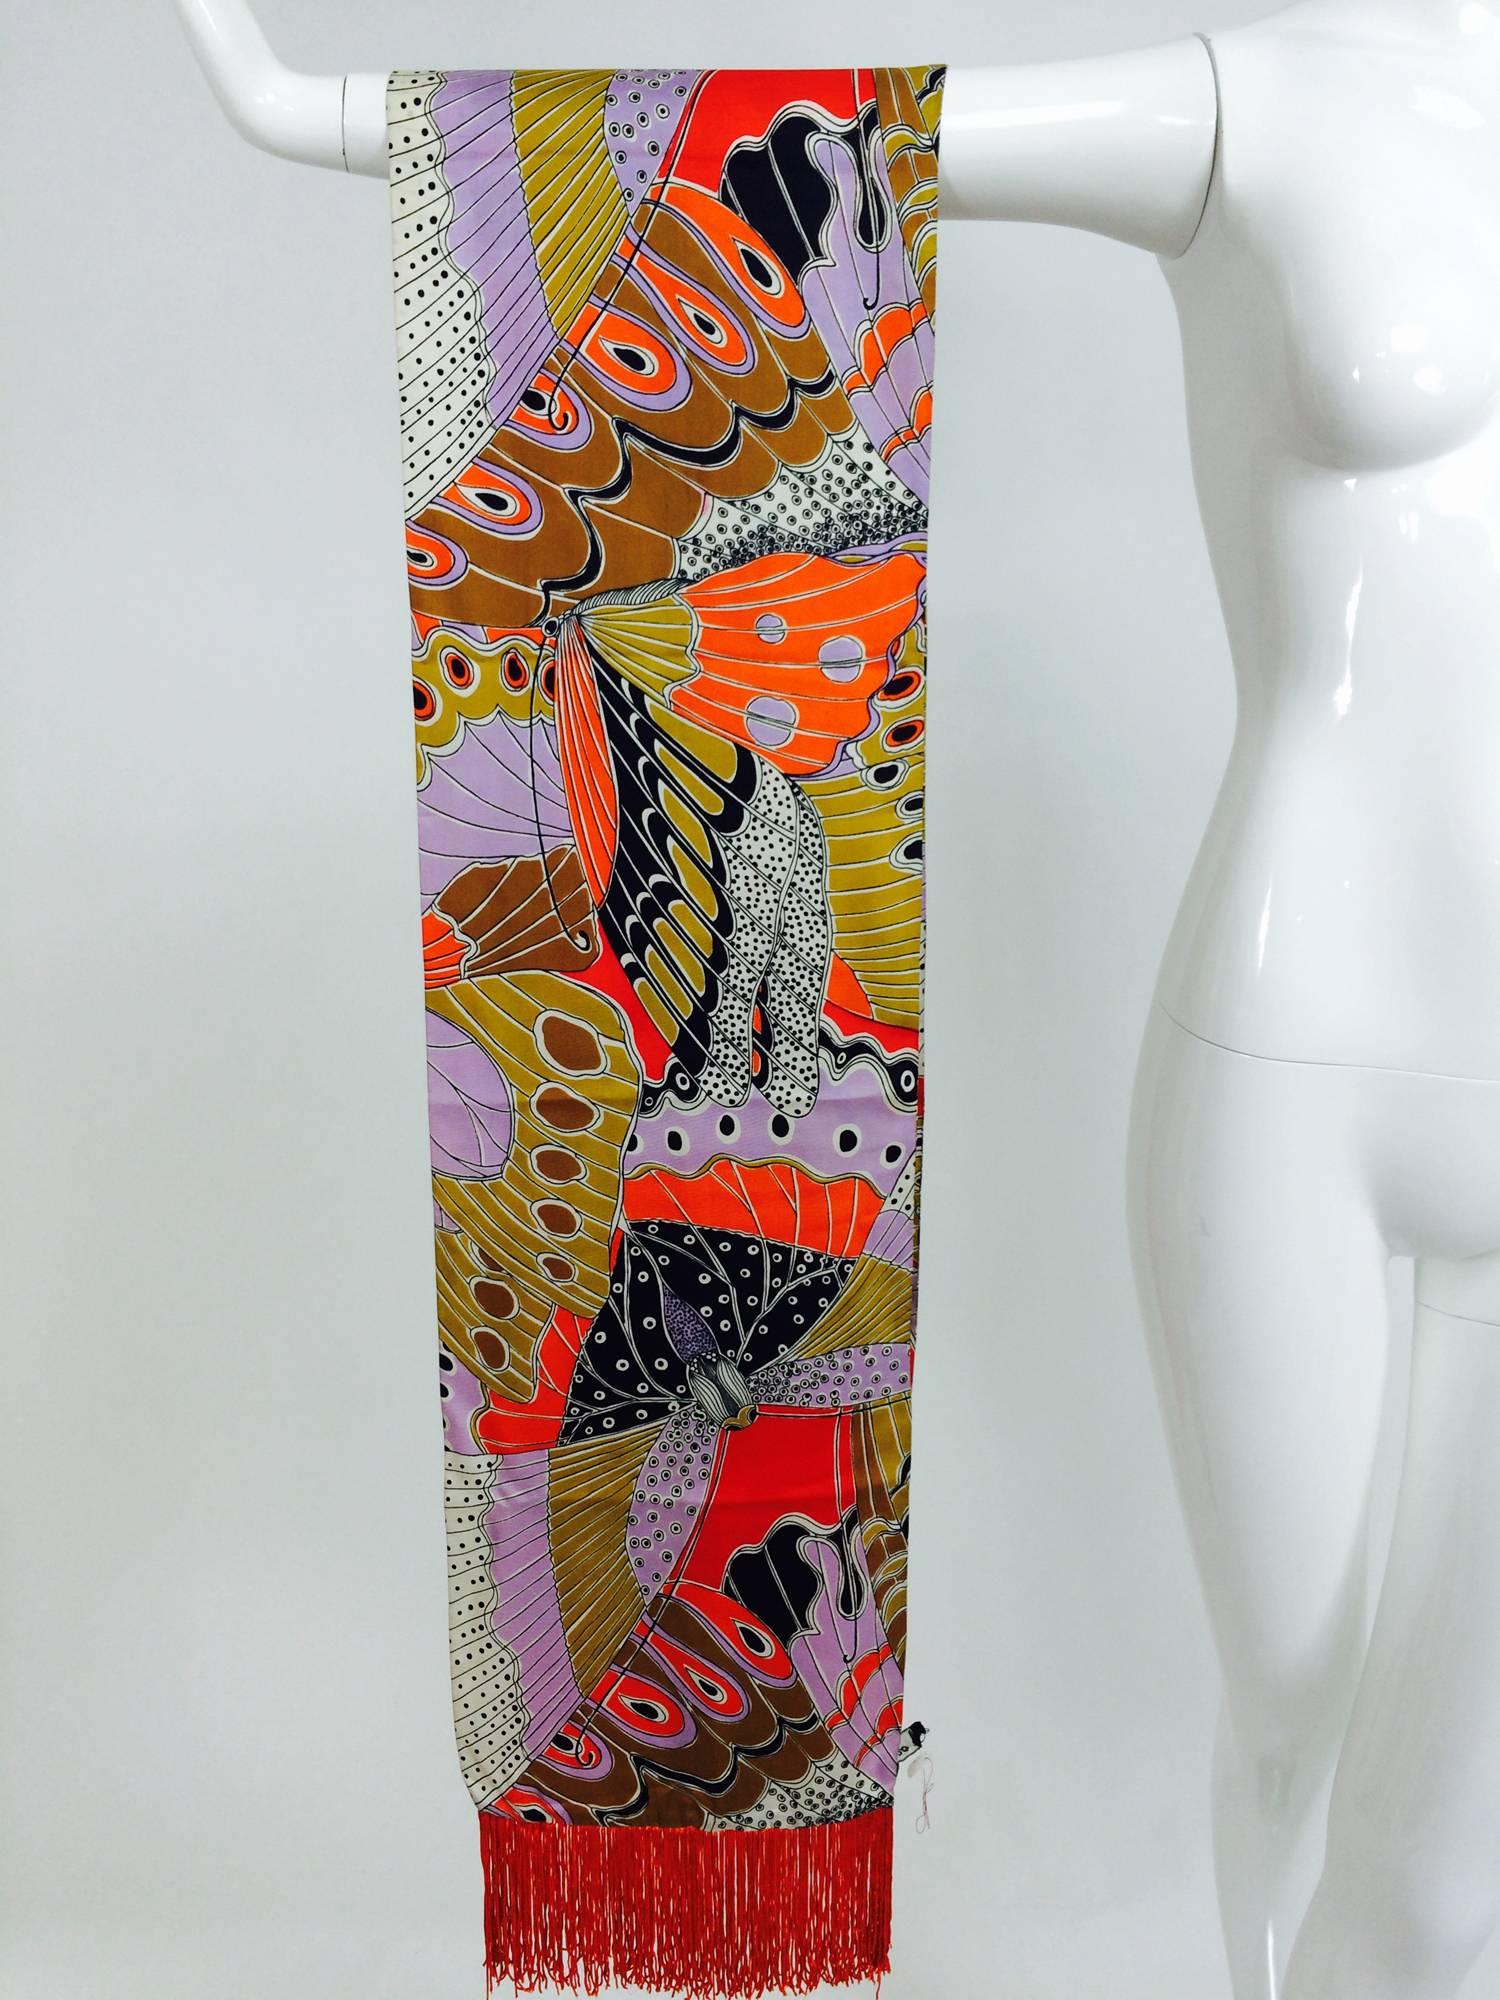 Vintage Doro wide & long 100% silk fringe graphic butterfly scarf 1960s...Beautiful vivid colours with an all over print of butterflies...Each end has a deep orange fringe...Labeled Doro 100% silk.
Measurements are:
10 1/2